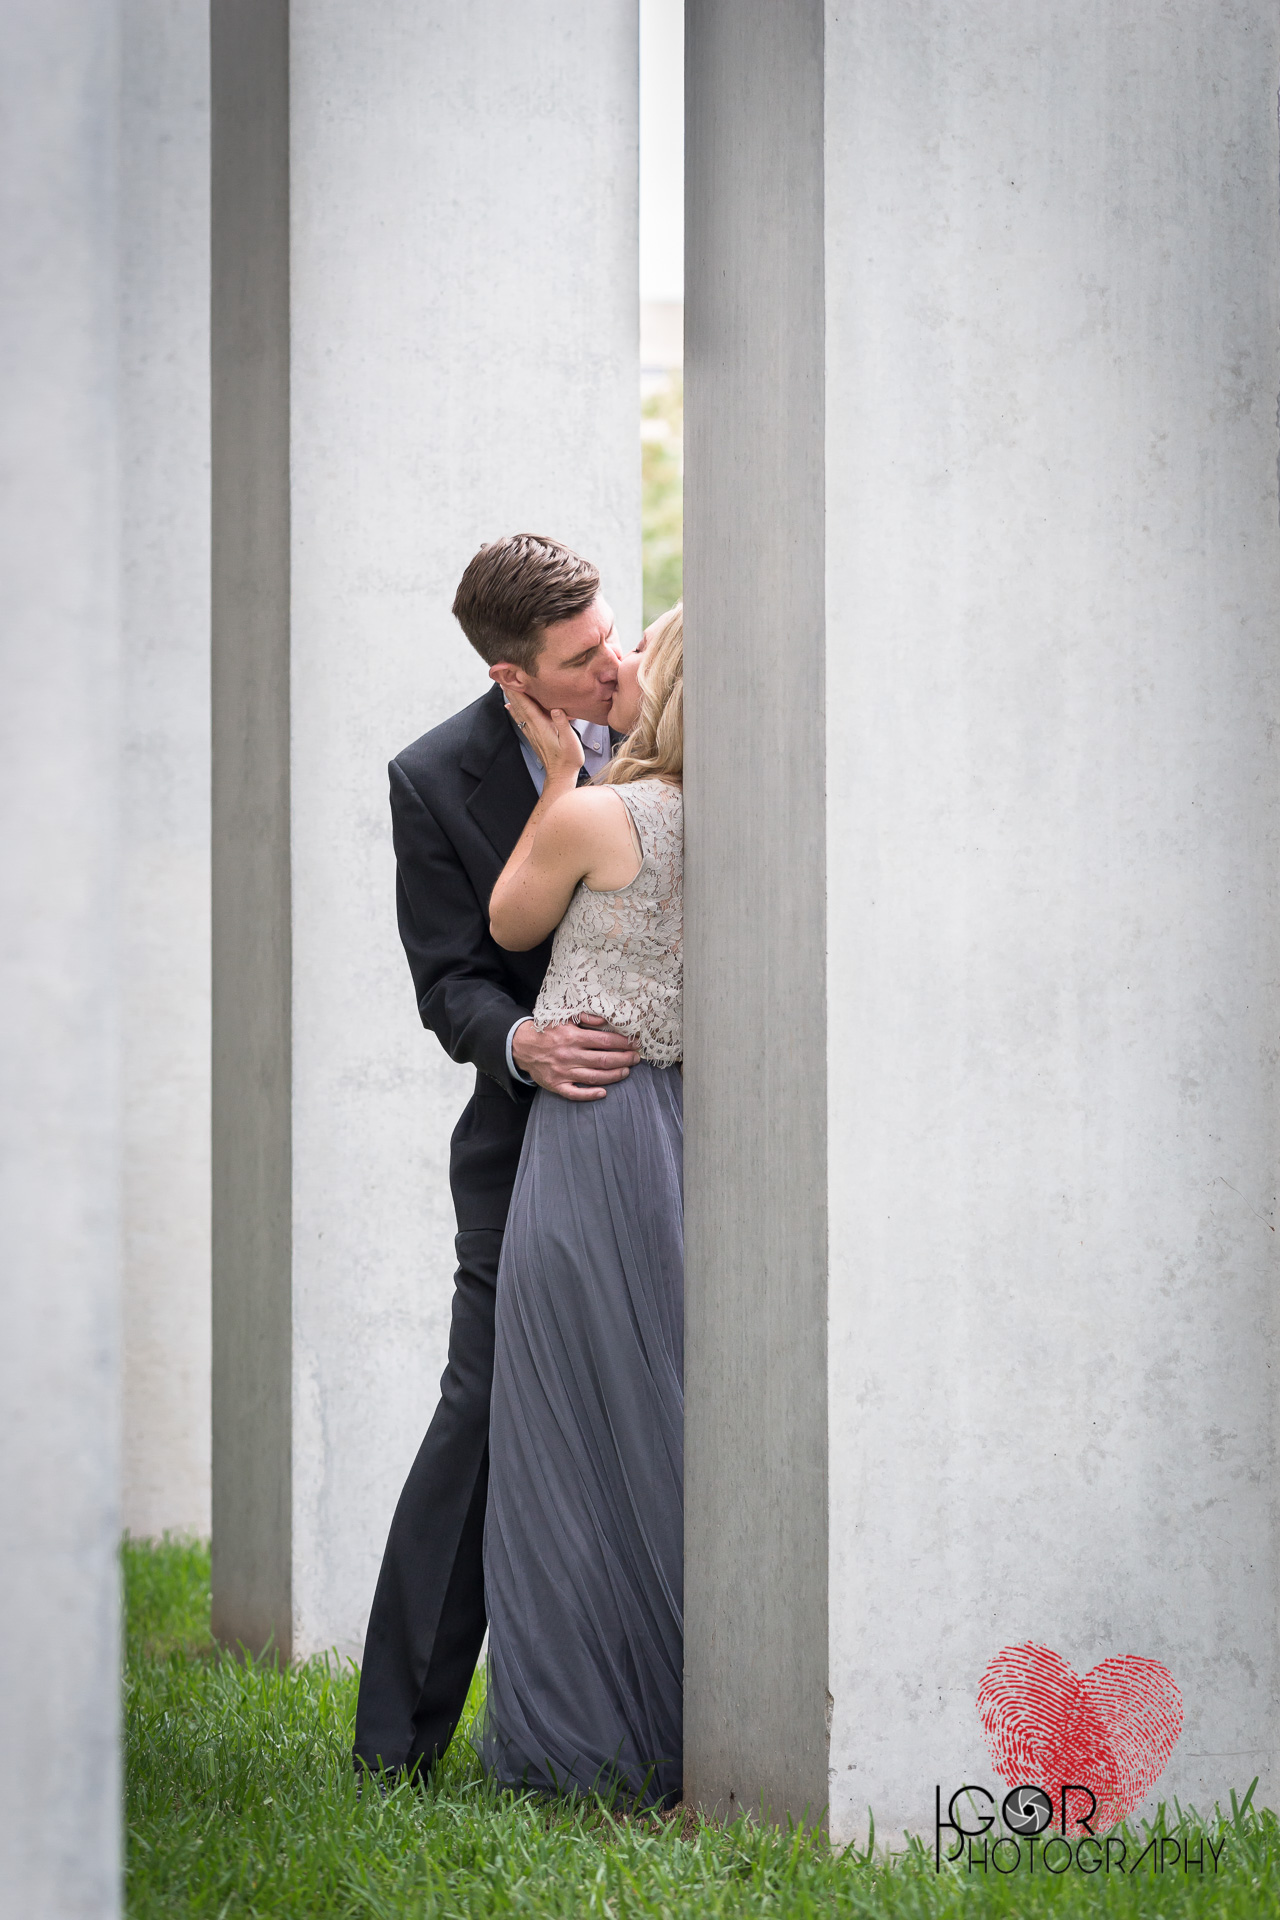 Modern engagement pictures